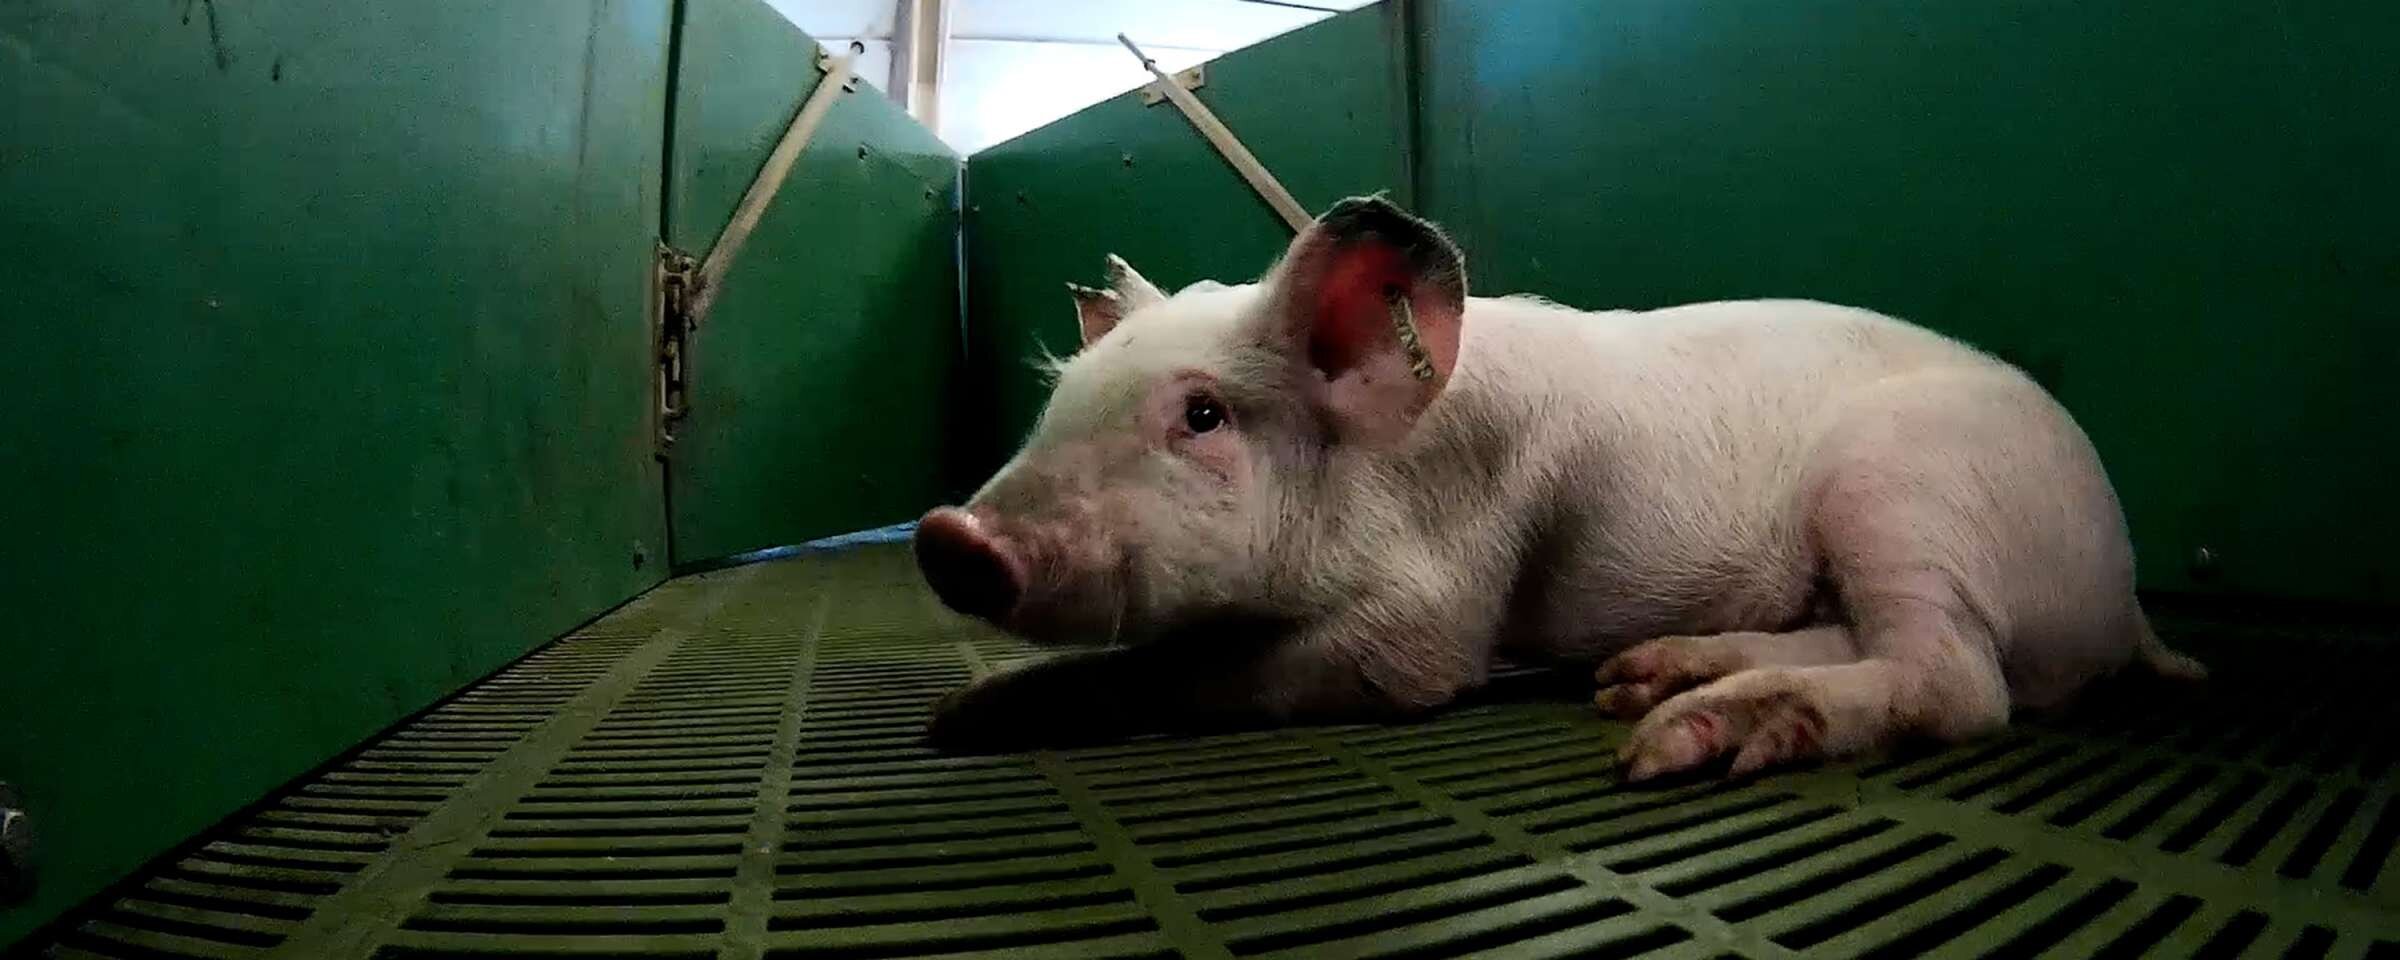 Foran dig prangende kimplante Pigs hammered to death at a farm owned by 'Quality Meat Scotland' chairman  — Surge | Creative Non-Profit for Animal Rights